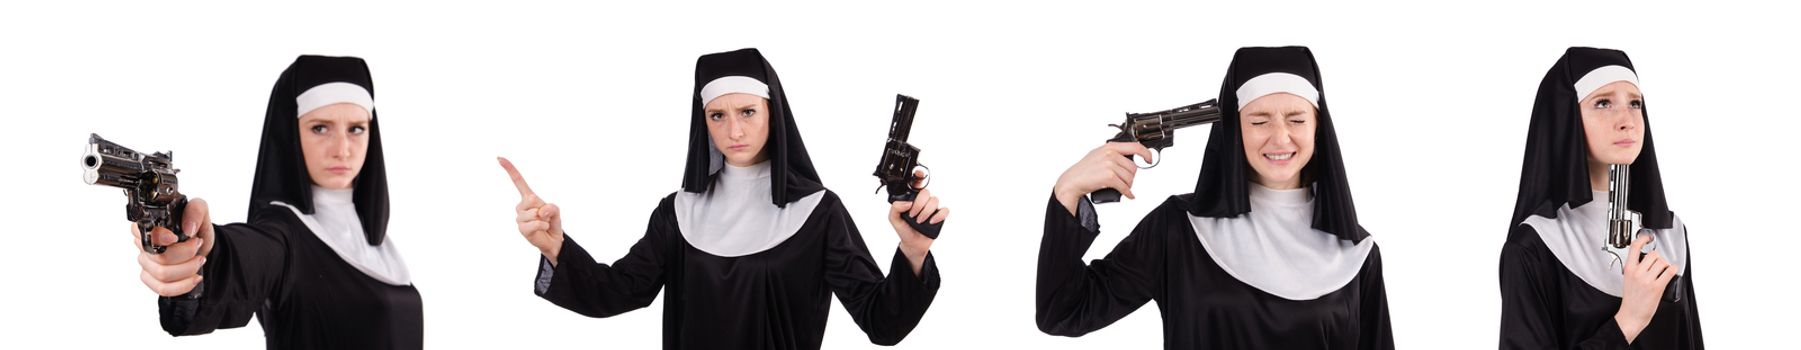 Aiming young nun with gun isolated on white